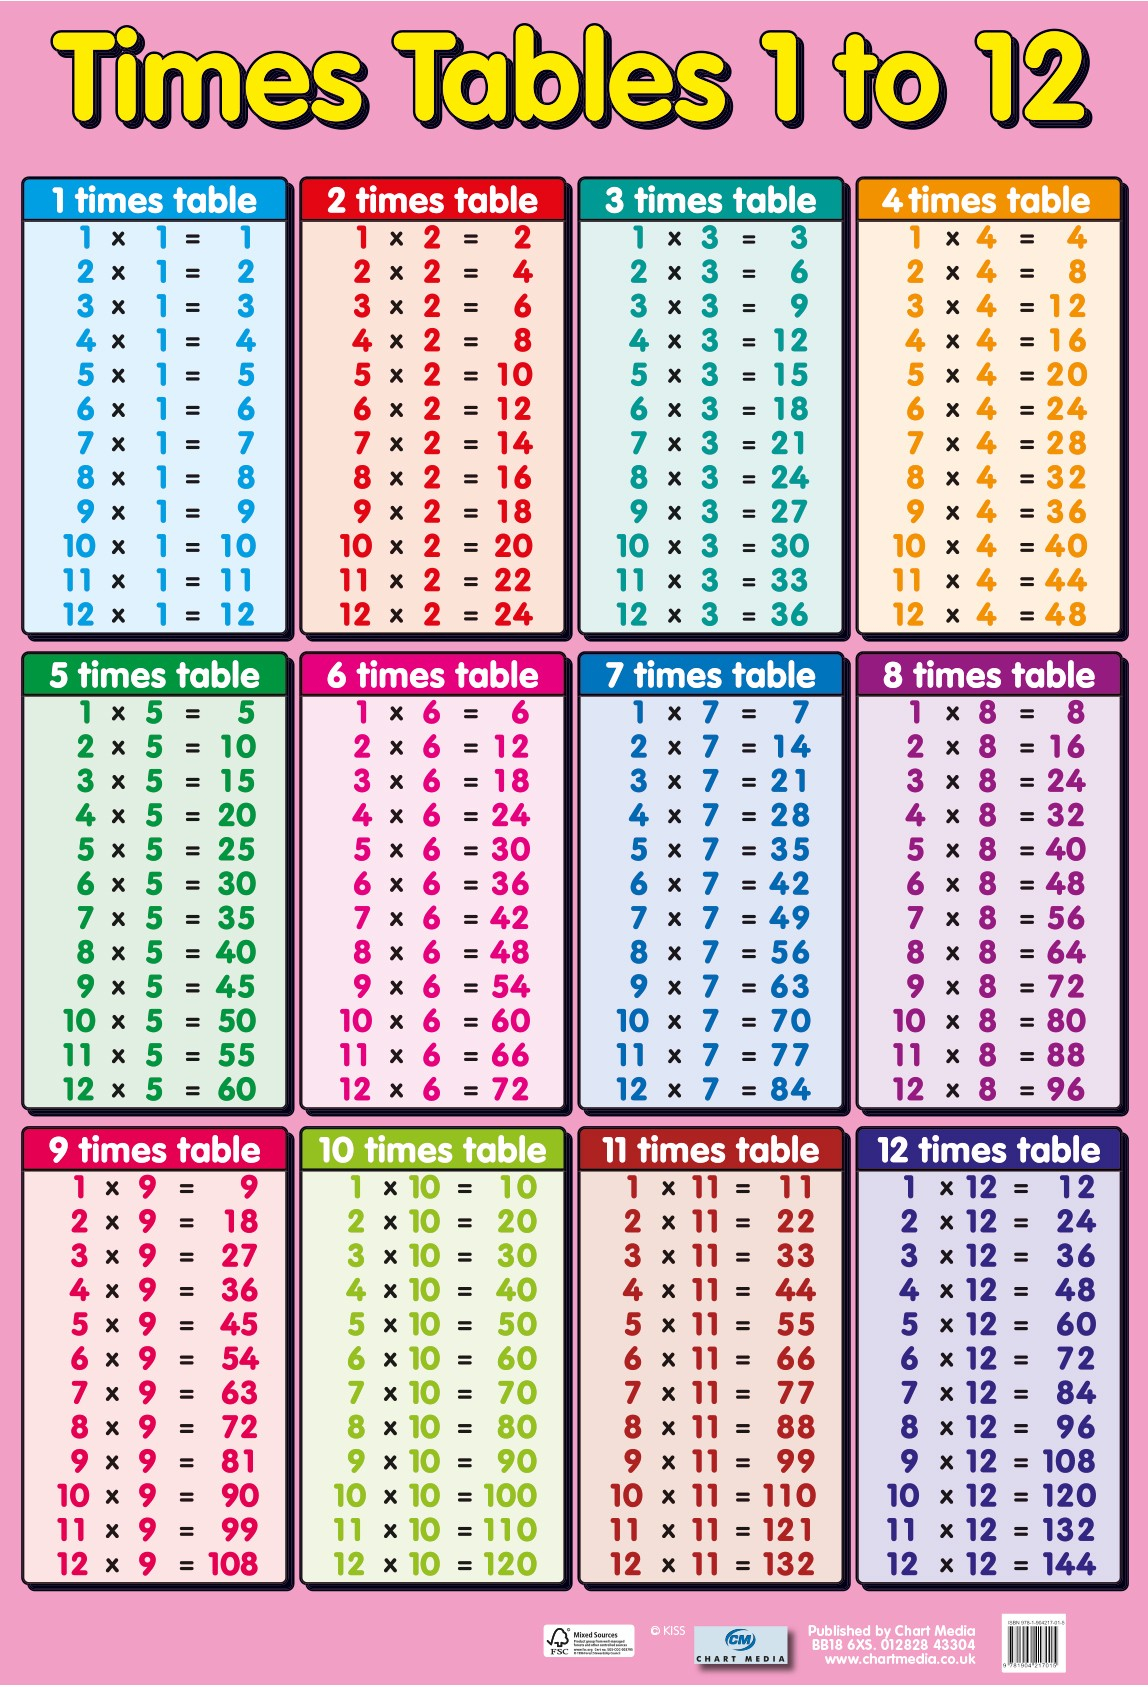 Times Tables 1 To 12 Posterchart Media | Chart Media